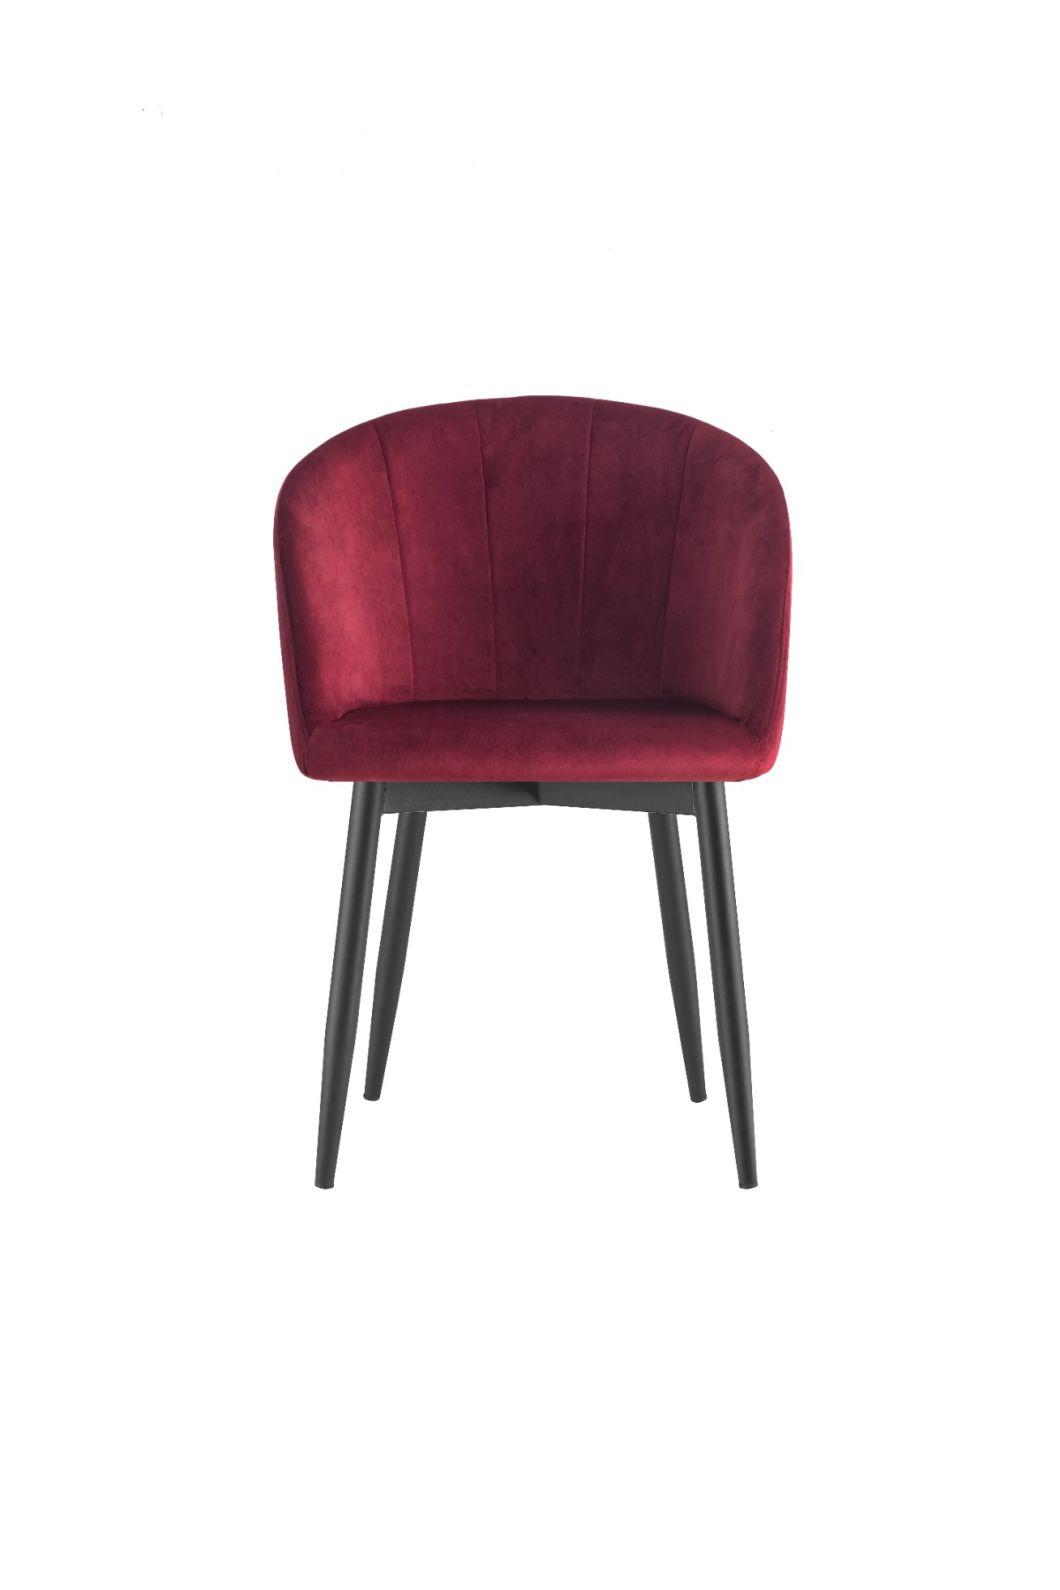 Hotel Event Metal Leisure Chair Pink Fabric Velvet Dining Chair in Living Room Armchair